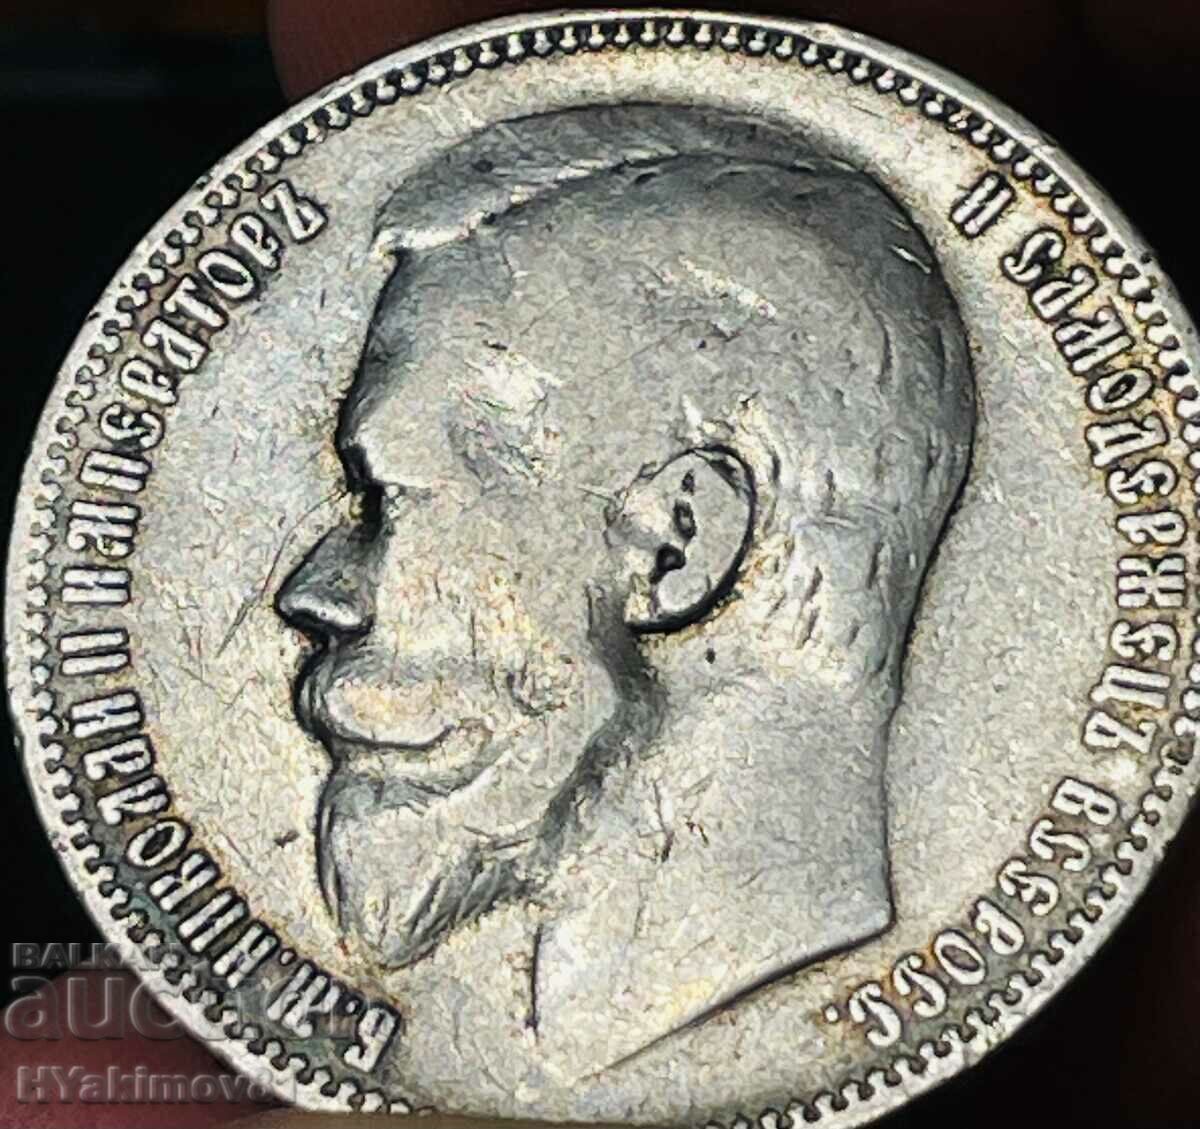 1 ruble from 1899